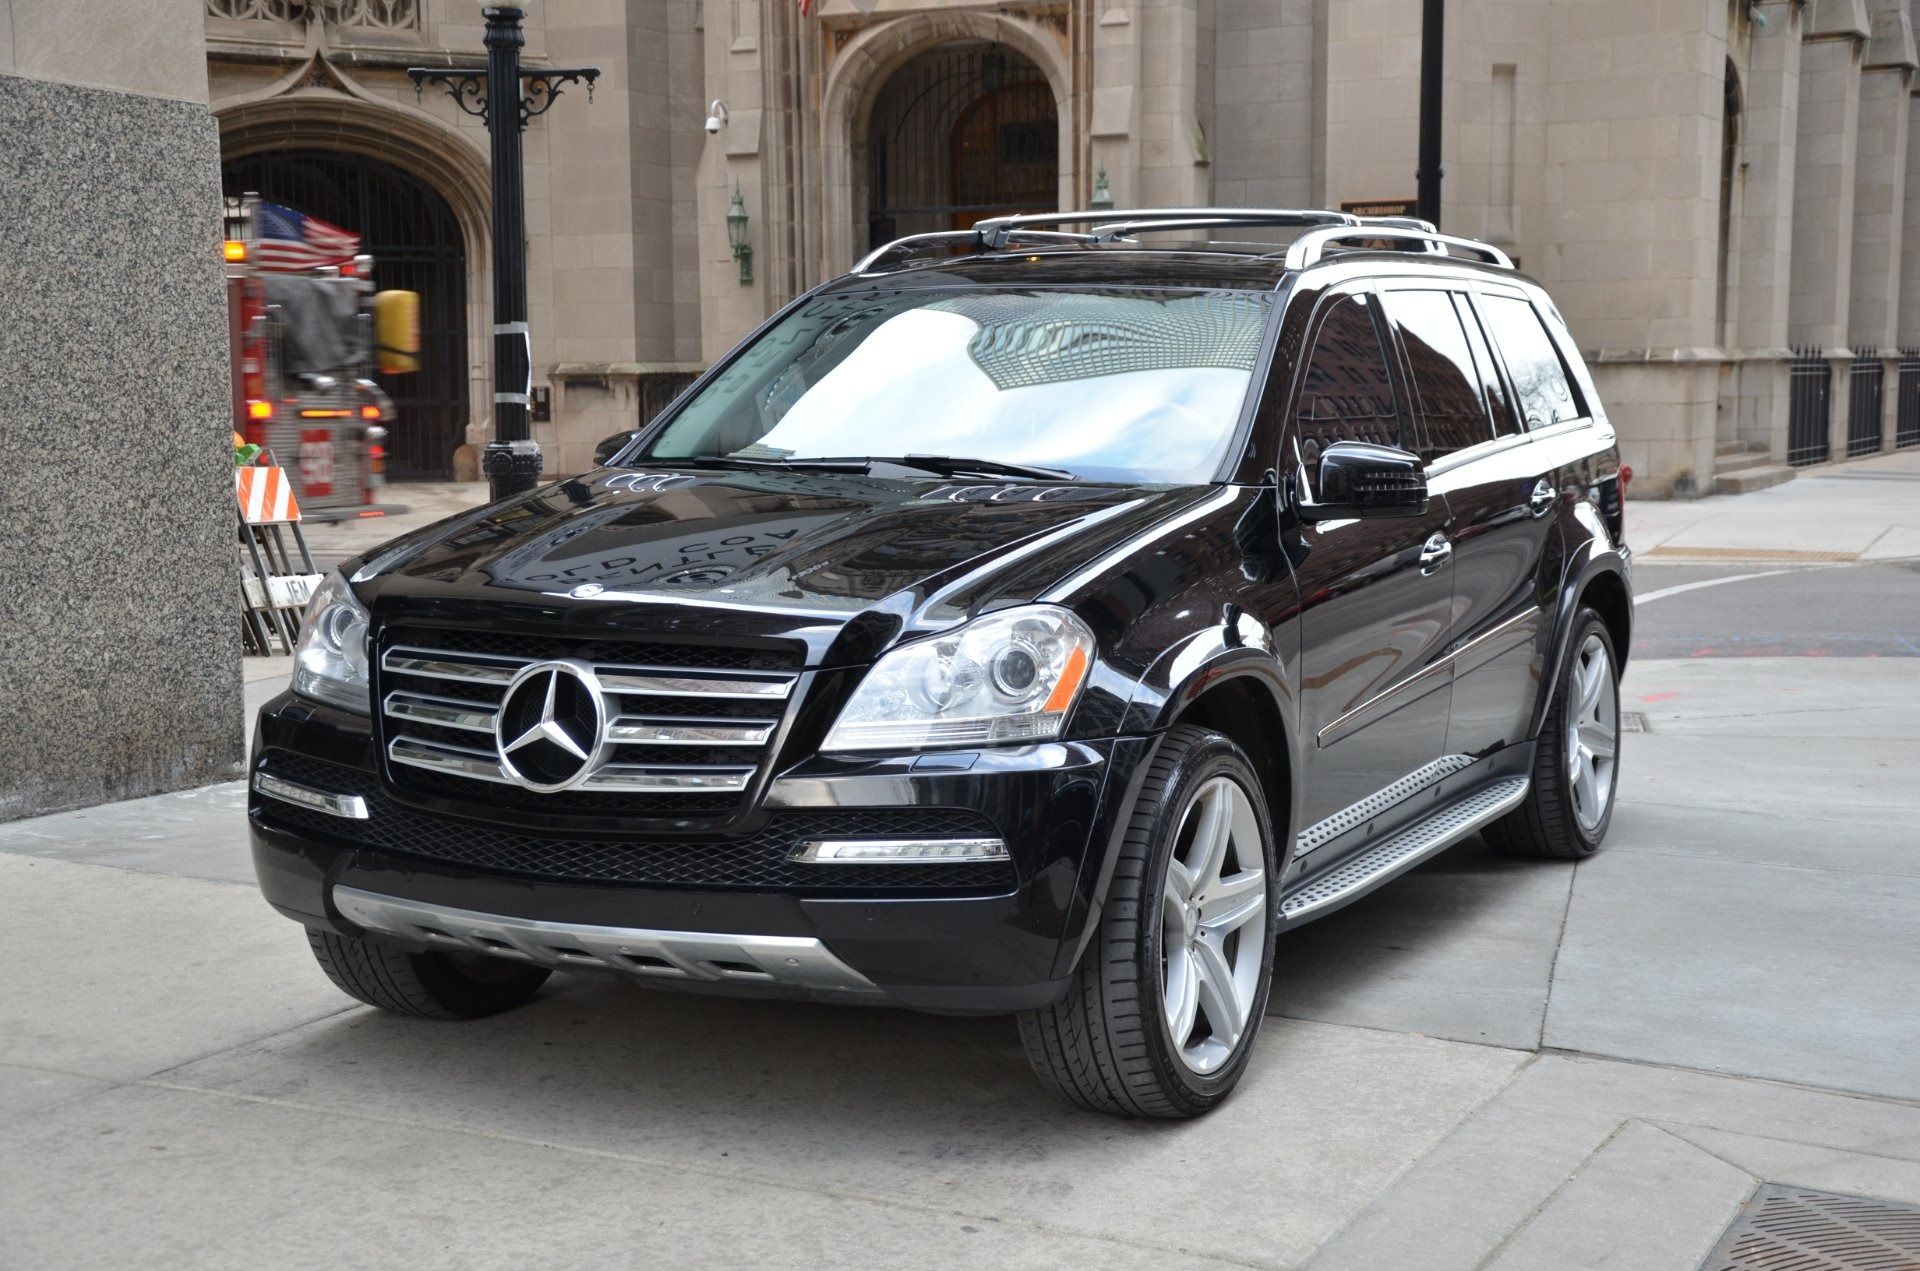 Mercedes Benz recalls 292k vehicles, due to a failure caused by the deterioration of the brakes. We are going to cover all there is to know about this recall.